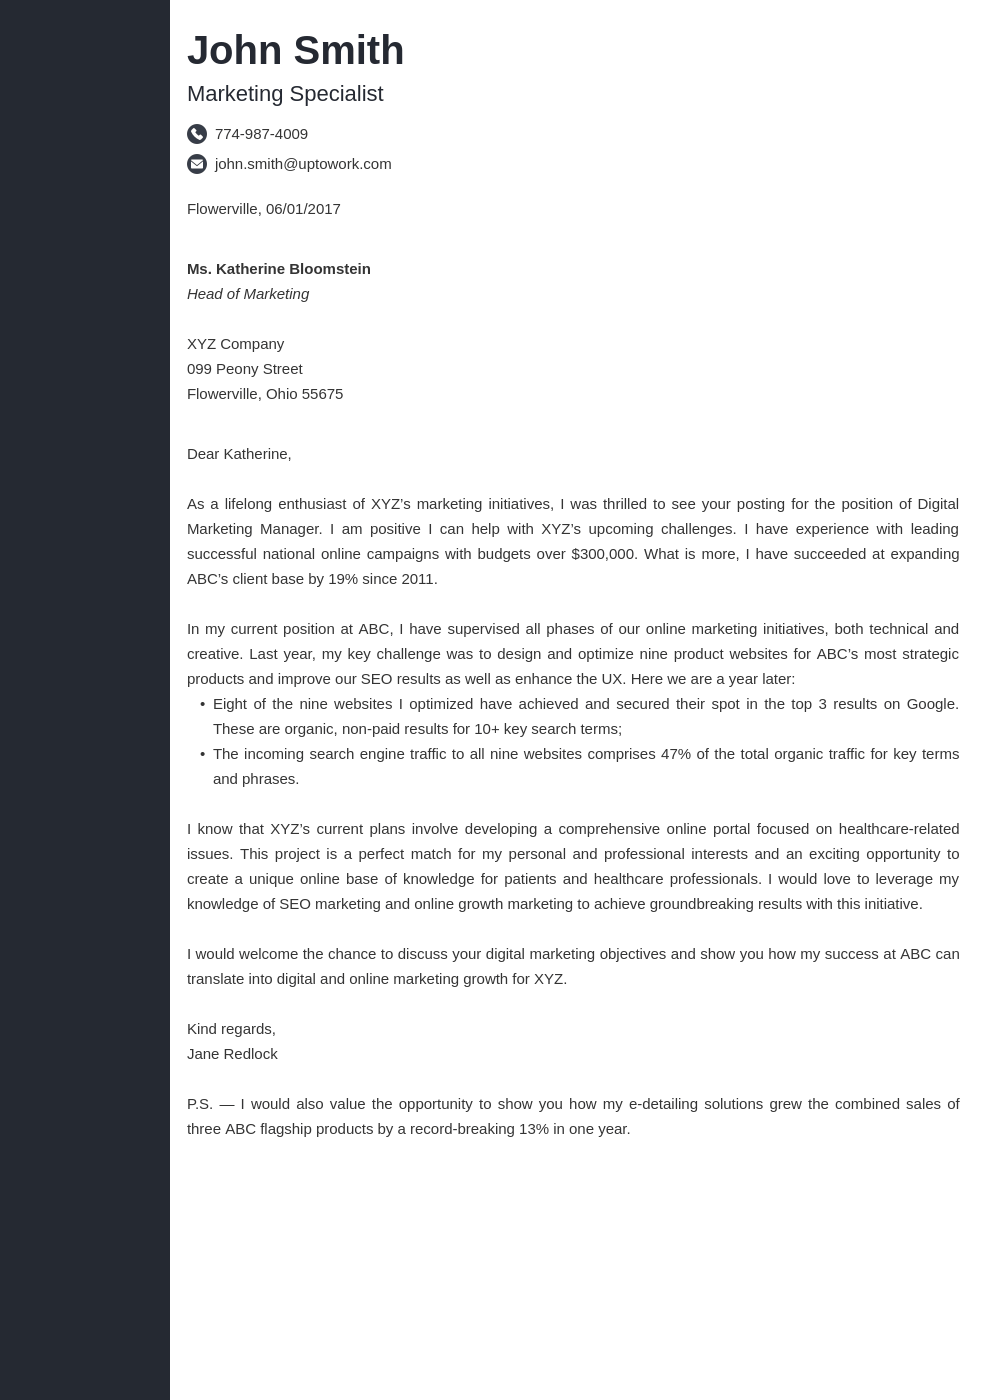 Sample Of Professional Letter from cdn-images.zety.com